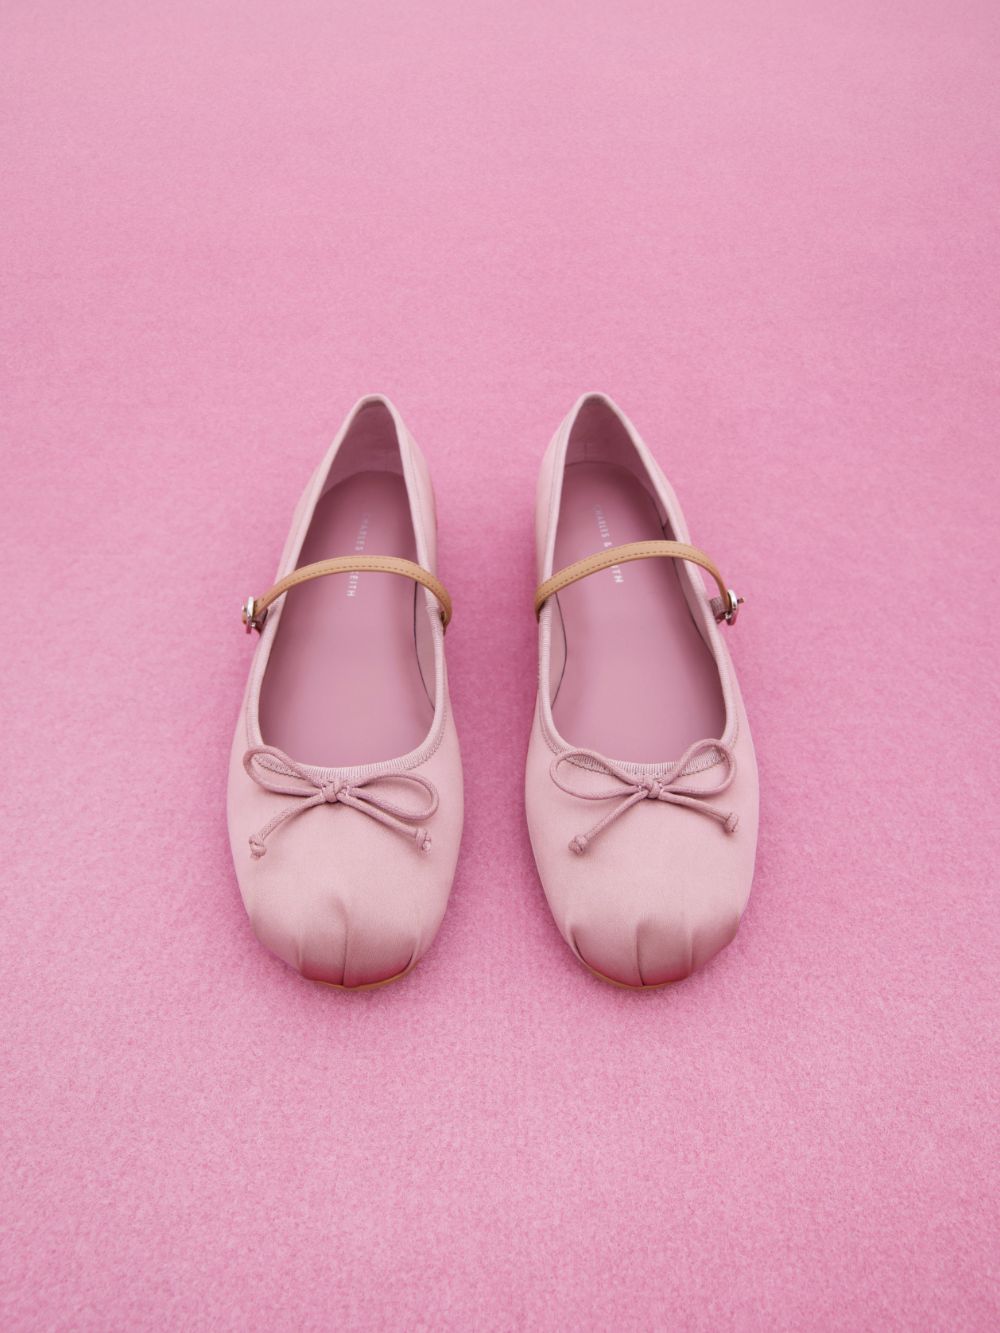 Women’s pink satin bow Mary Jane flats - CHARLES & KEITH